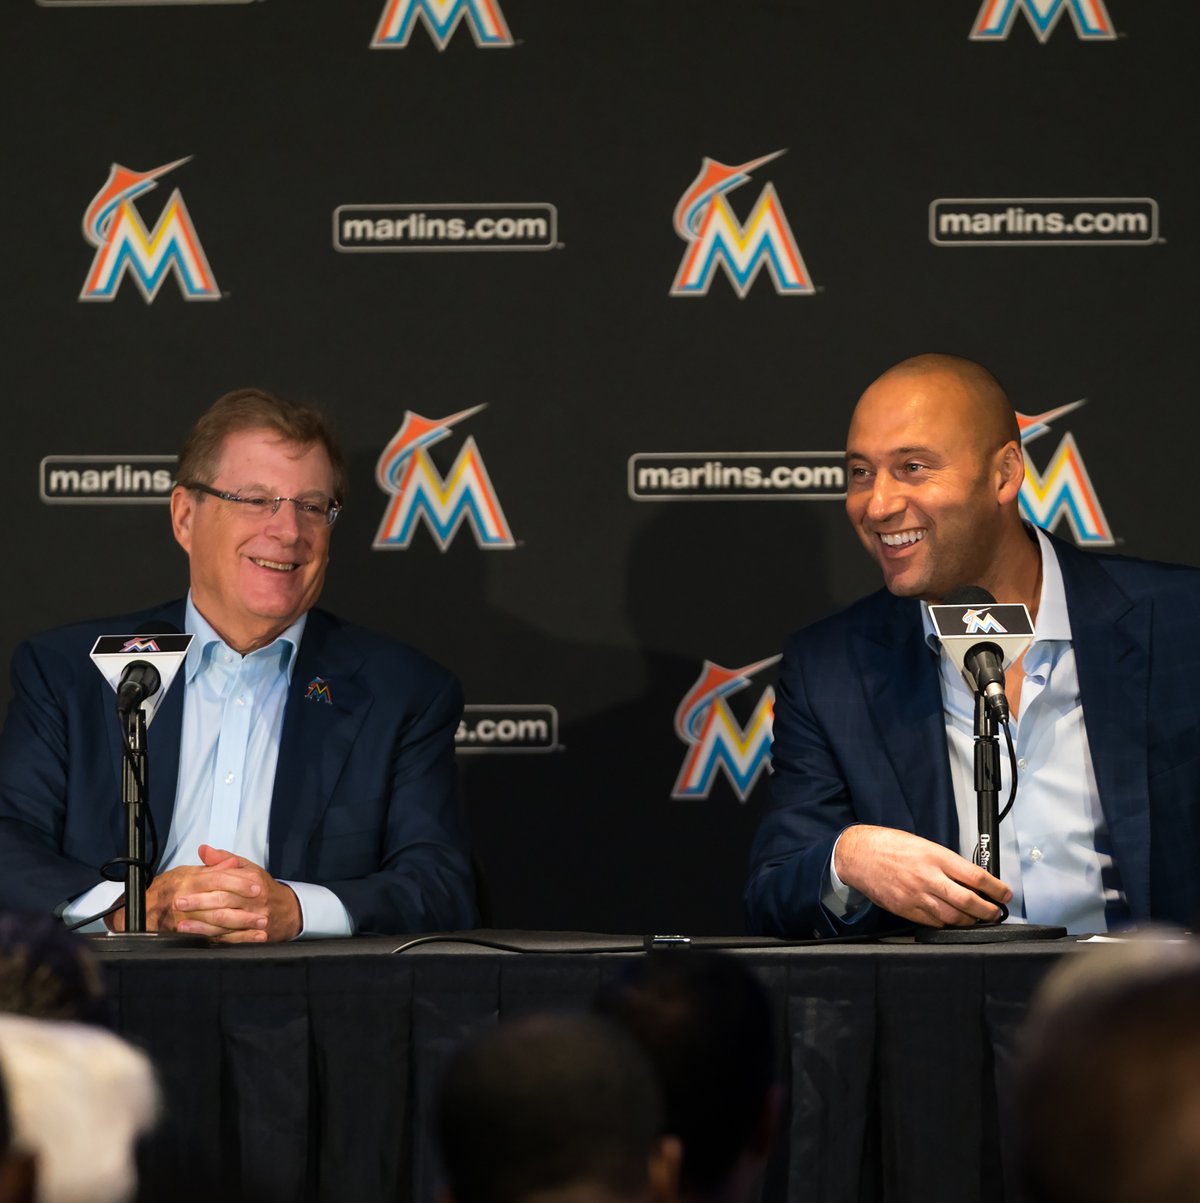 Jeb Bush and Derek Jeter teaming up in pursuit of Miami Marlins